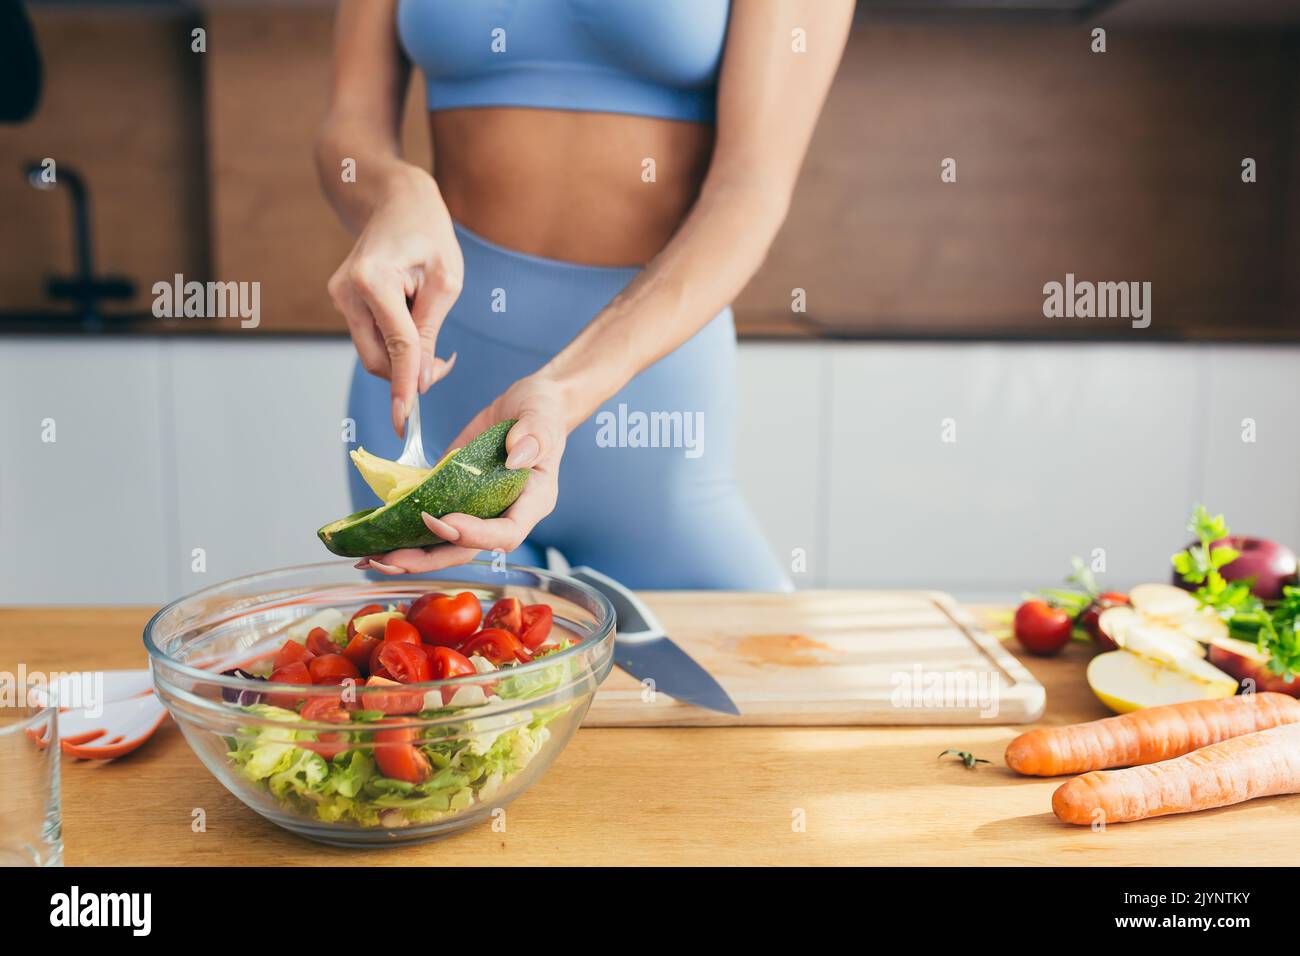 Close up photo, body part, hands of young fitness woman cutting fresh vegetables on kitchen salad at home Stock Photo